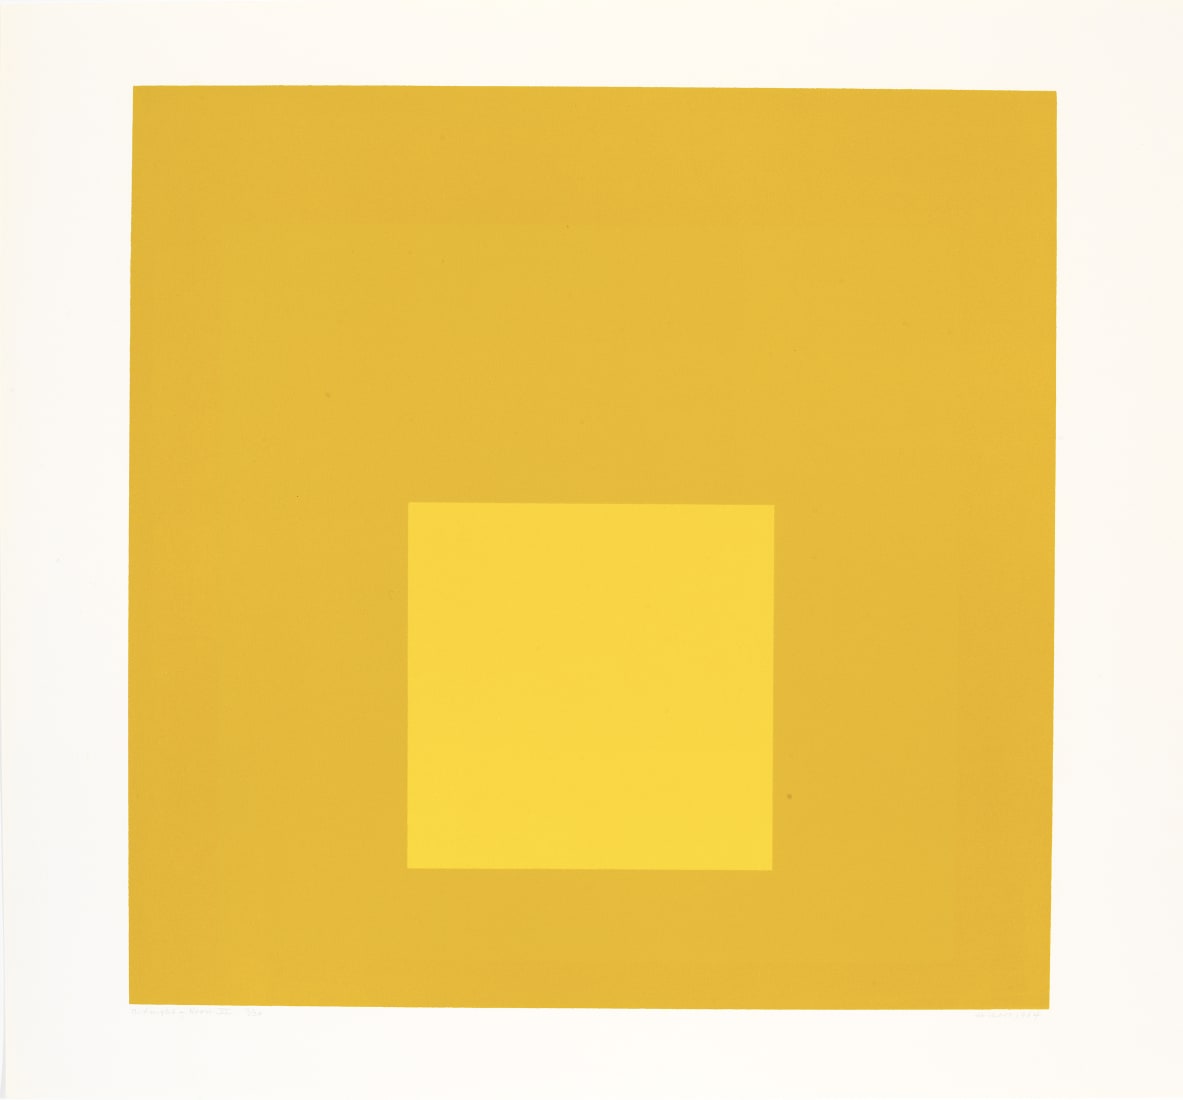 <p><span class="artist"><strong>Josef Albers</strong></span>, <em>Midnight and Noon VI</em>, 1964</p>